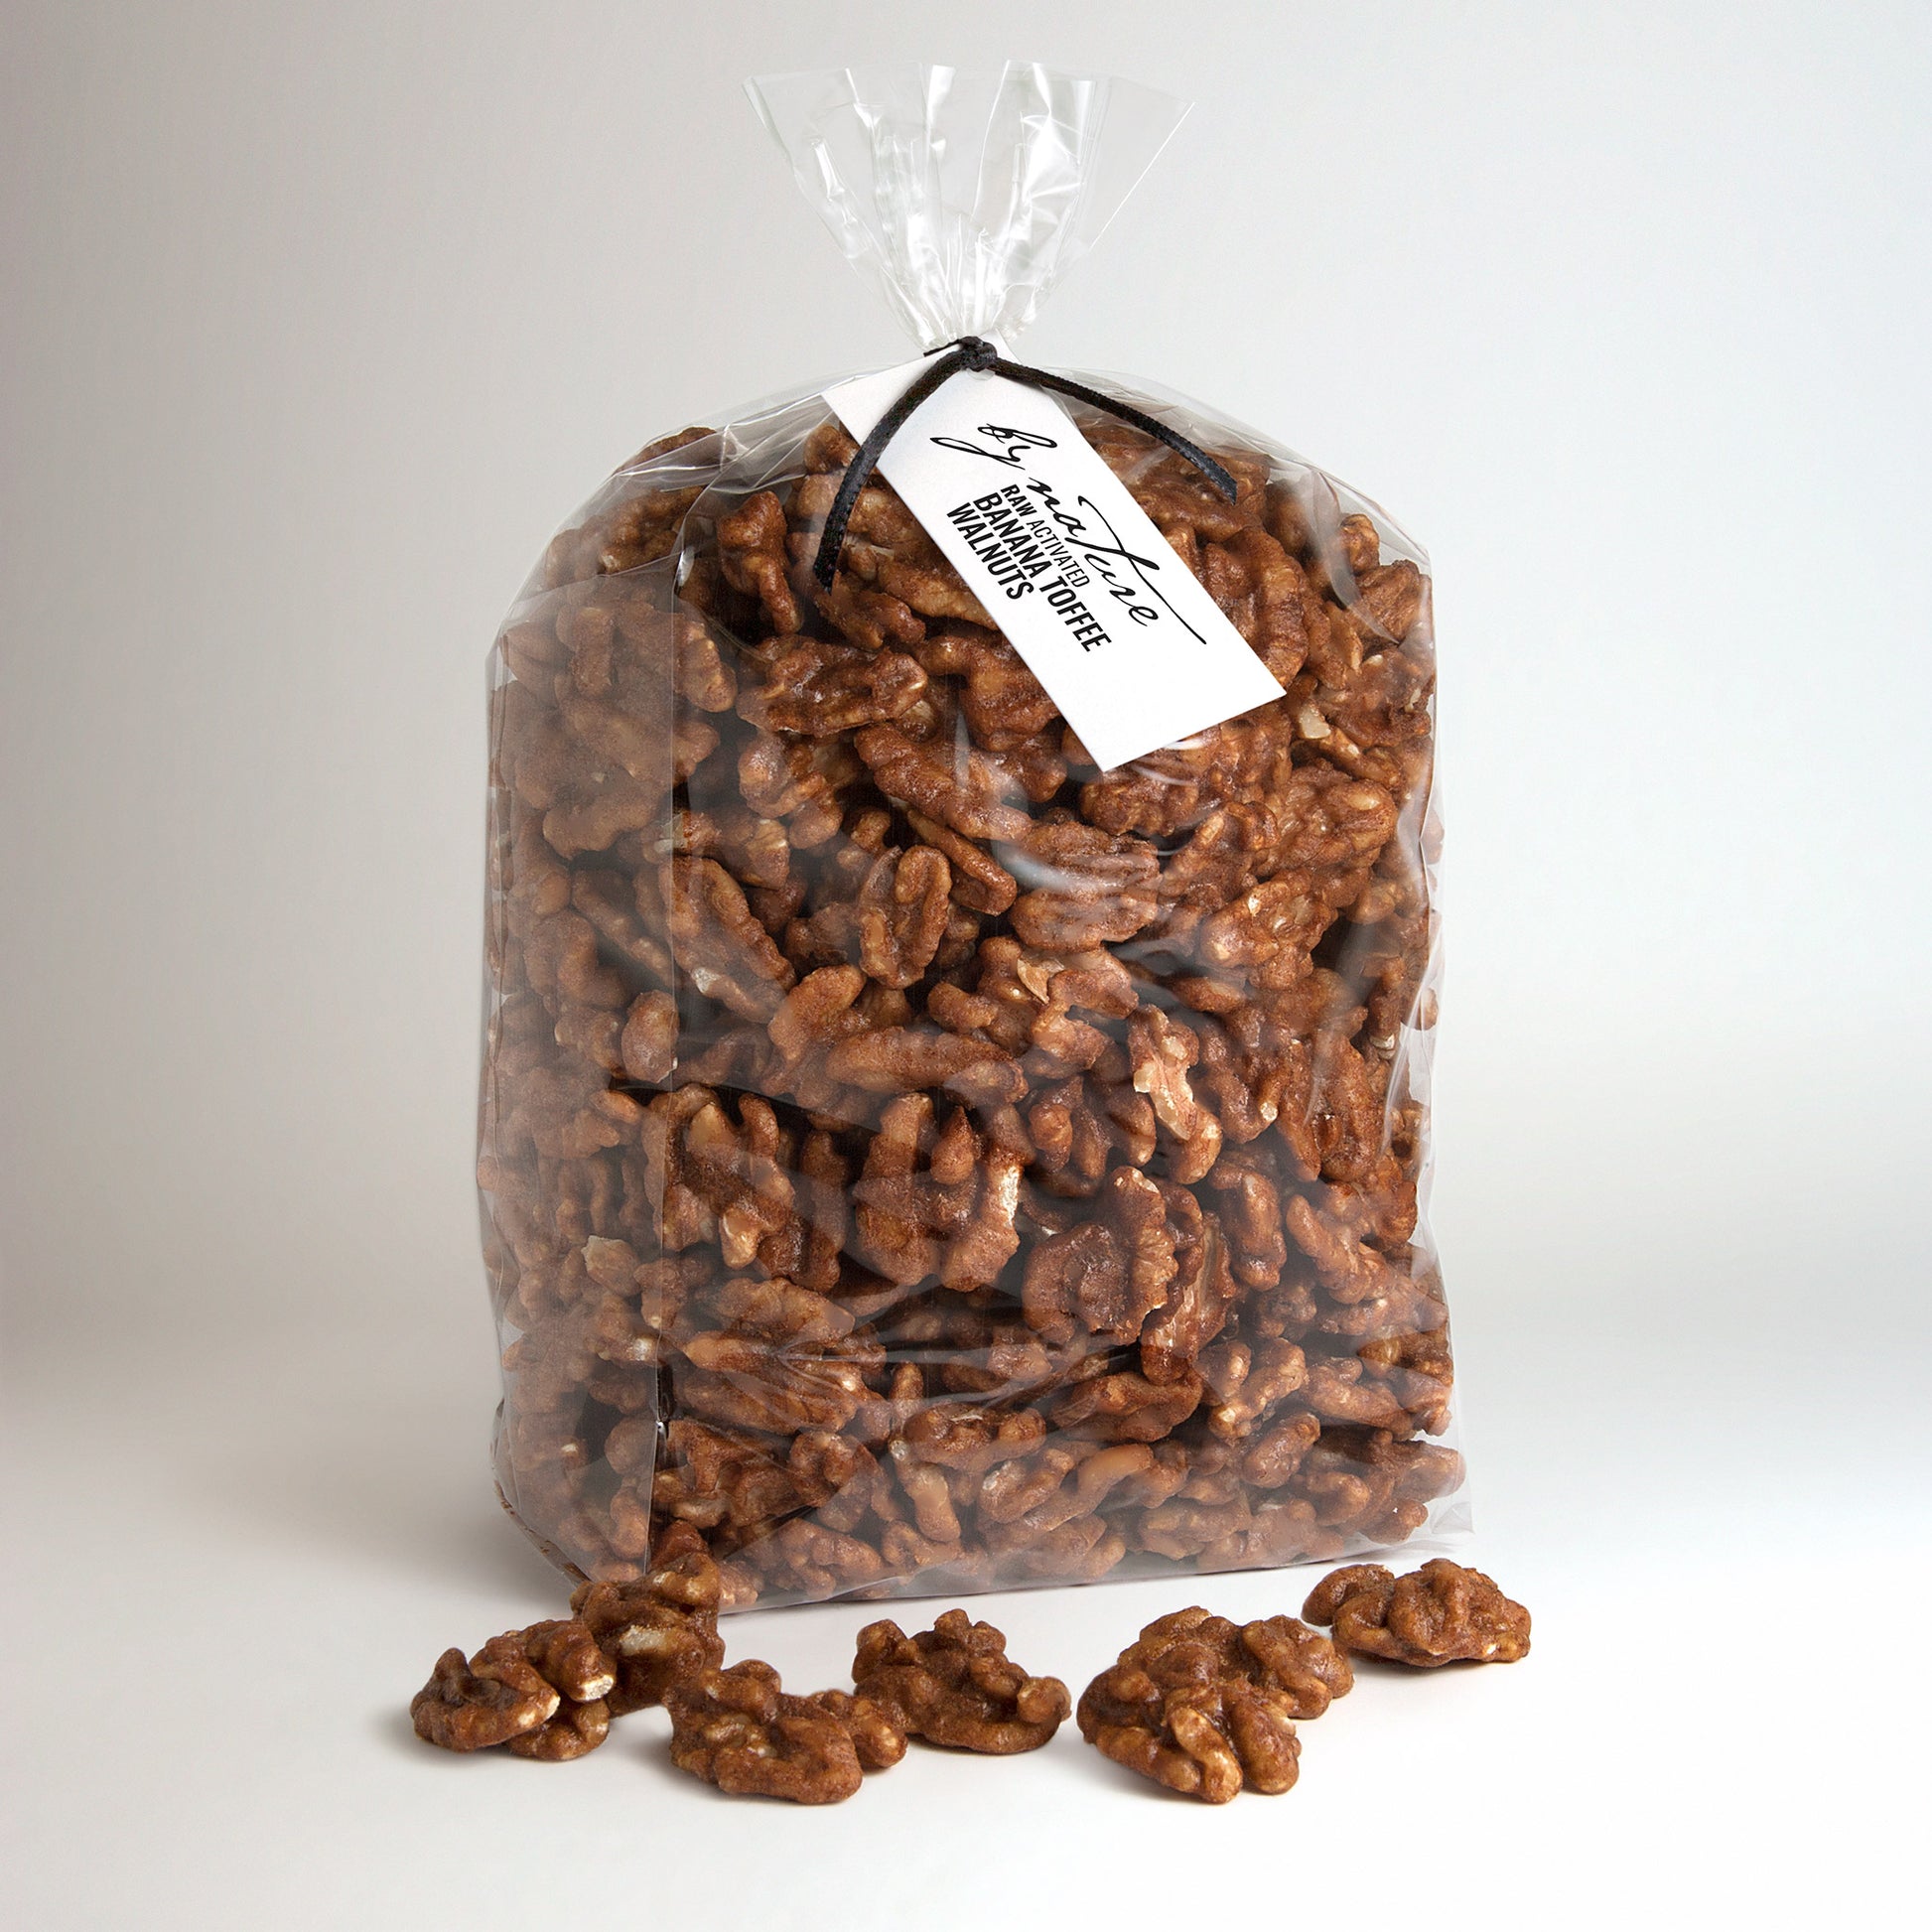 BY NATURE Banana Toffee Walnuts, 1kg - raw, activated, dried not roasted.